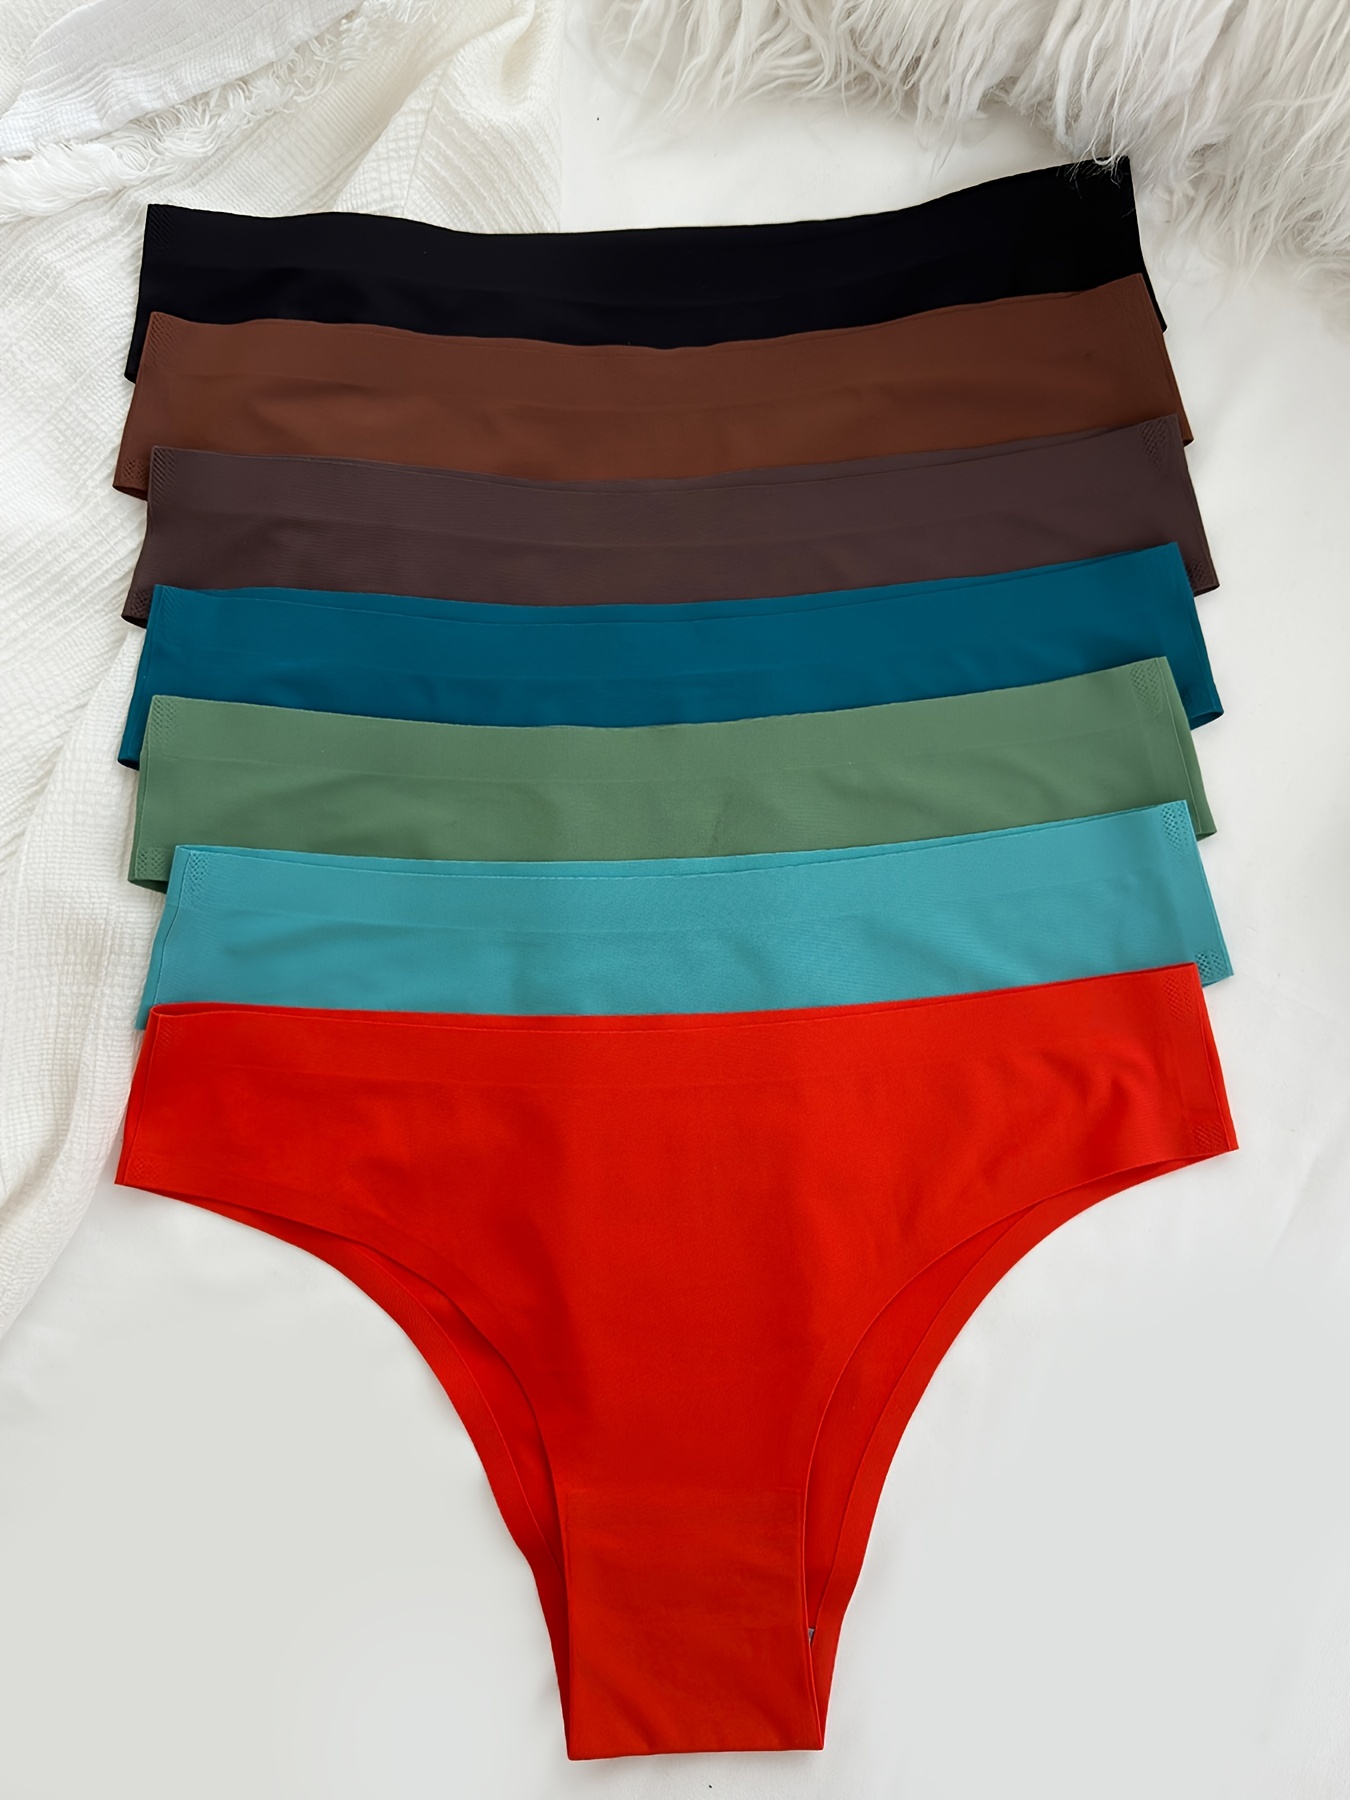 PACK OF 6 MULTICOLOR Women's Cotton Hipster Seamless Panty Ladies